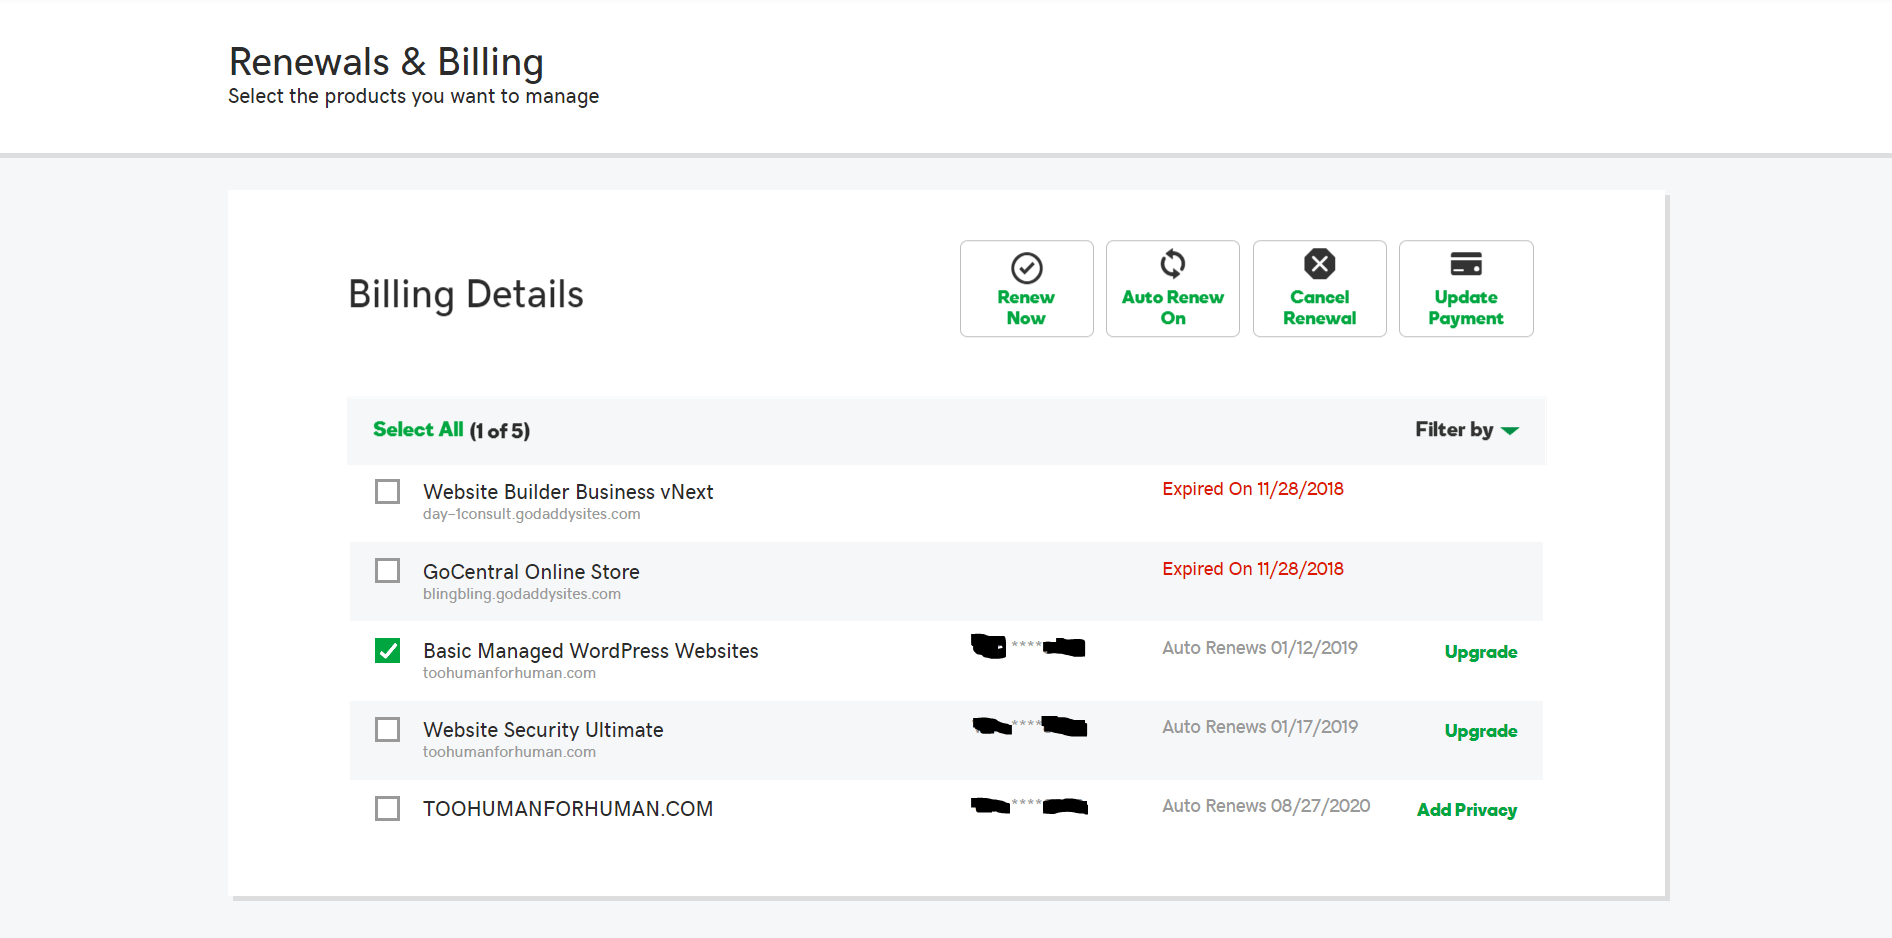 How to Cancel Your Account with GoDaddy and Get a Refund-image1